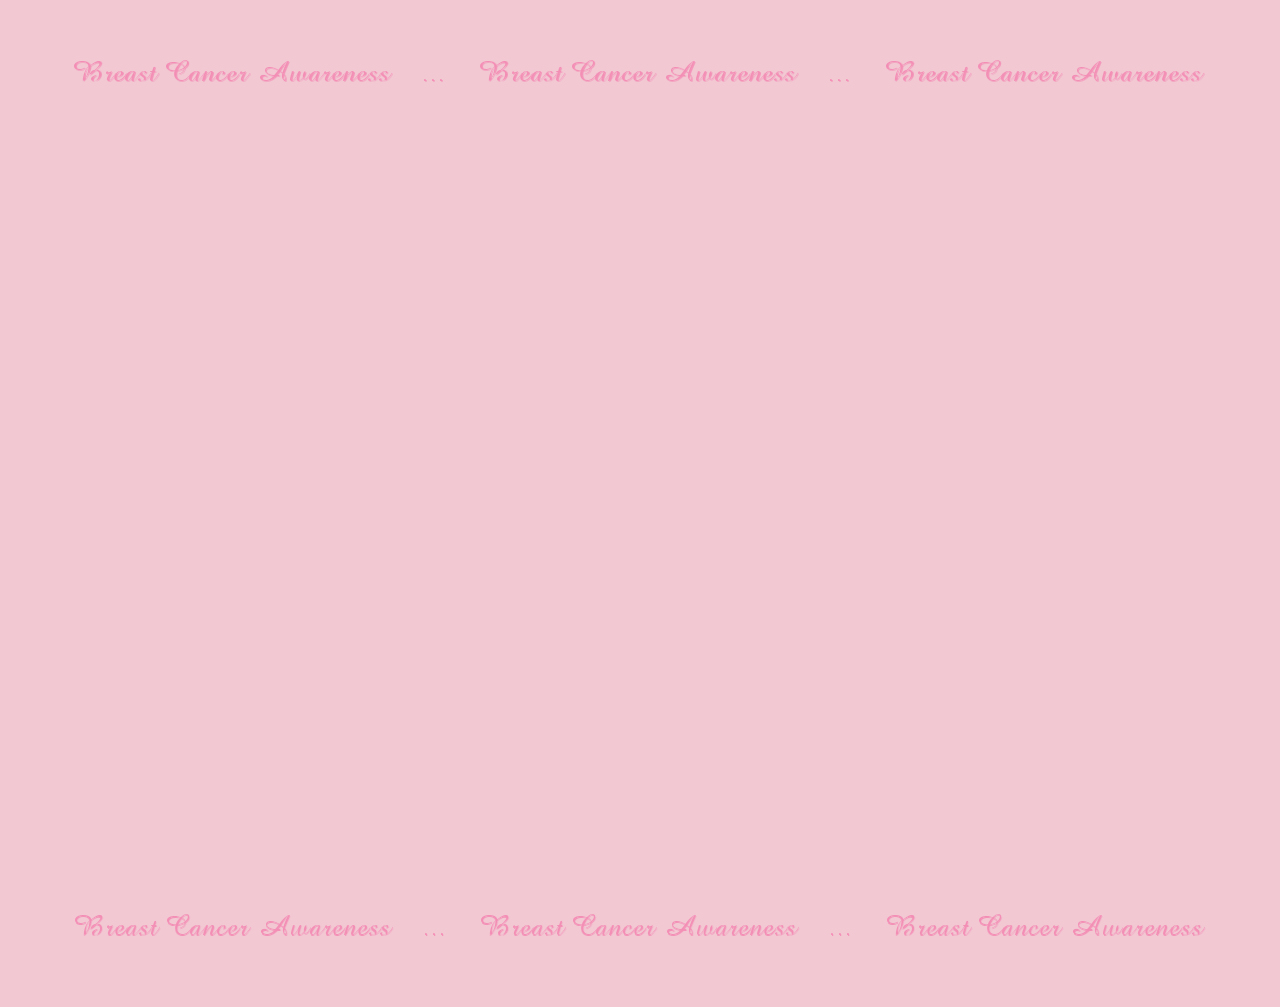 Image Home Breast Cancer Awareness Wallpaper